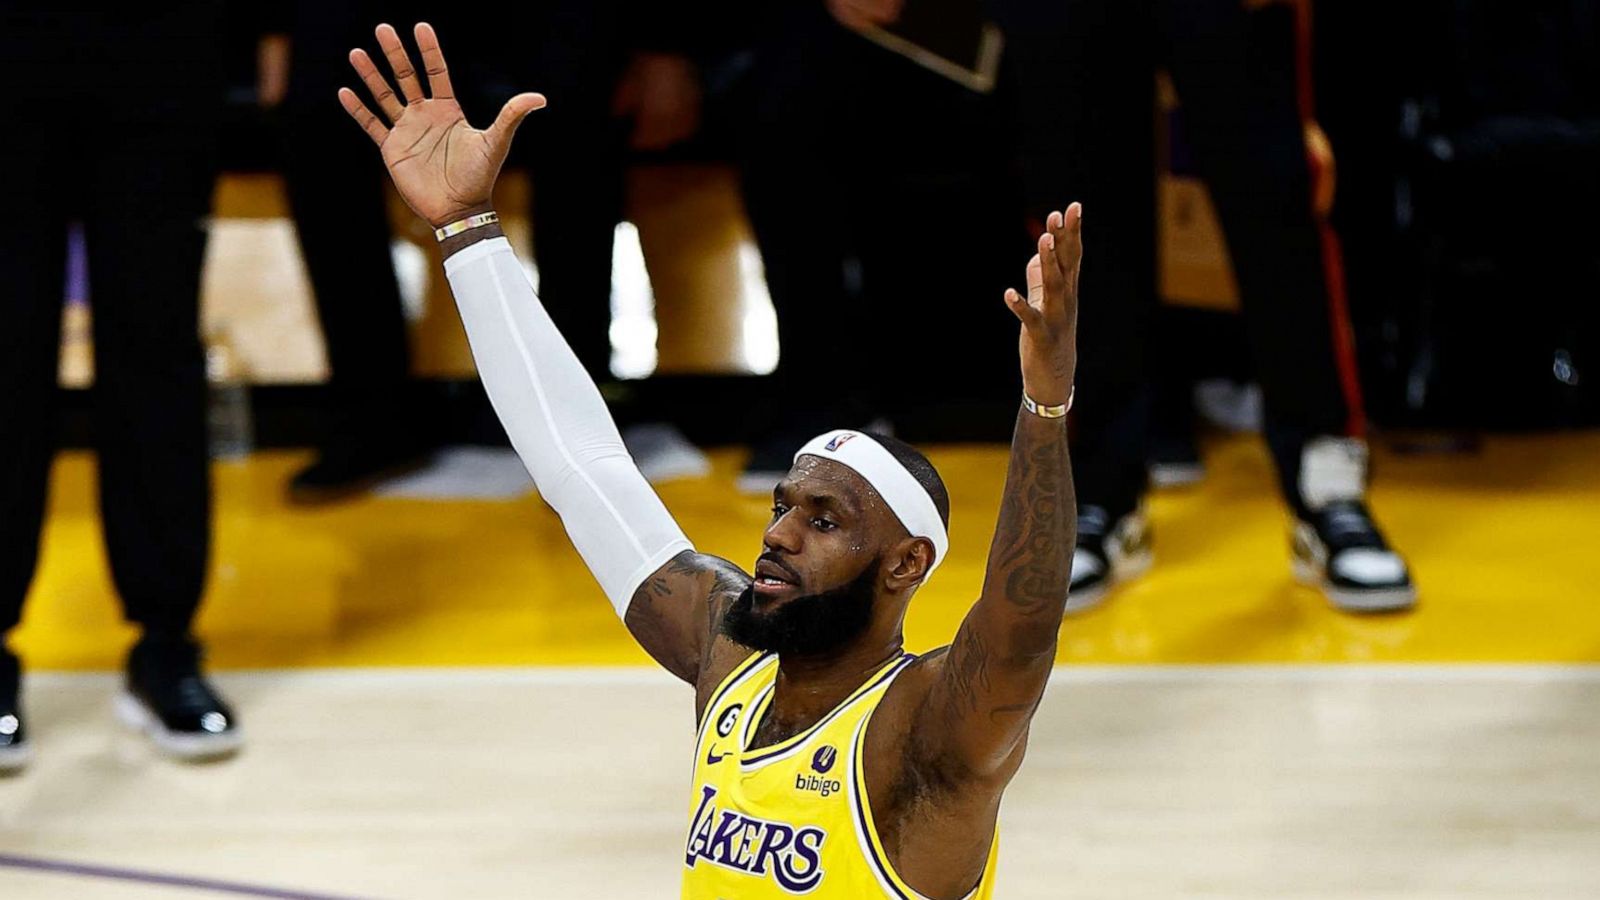 LeBron James breaks record for most career points in NBA history